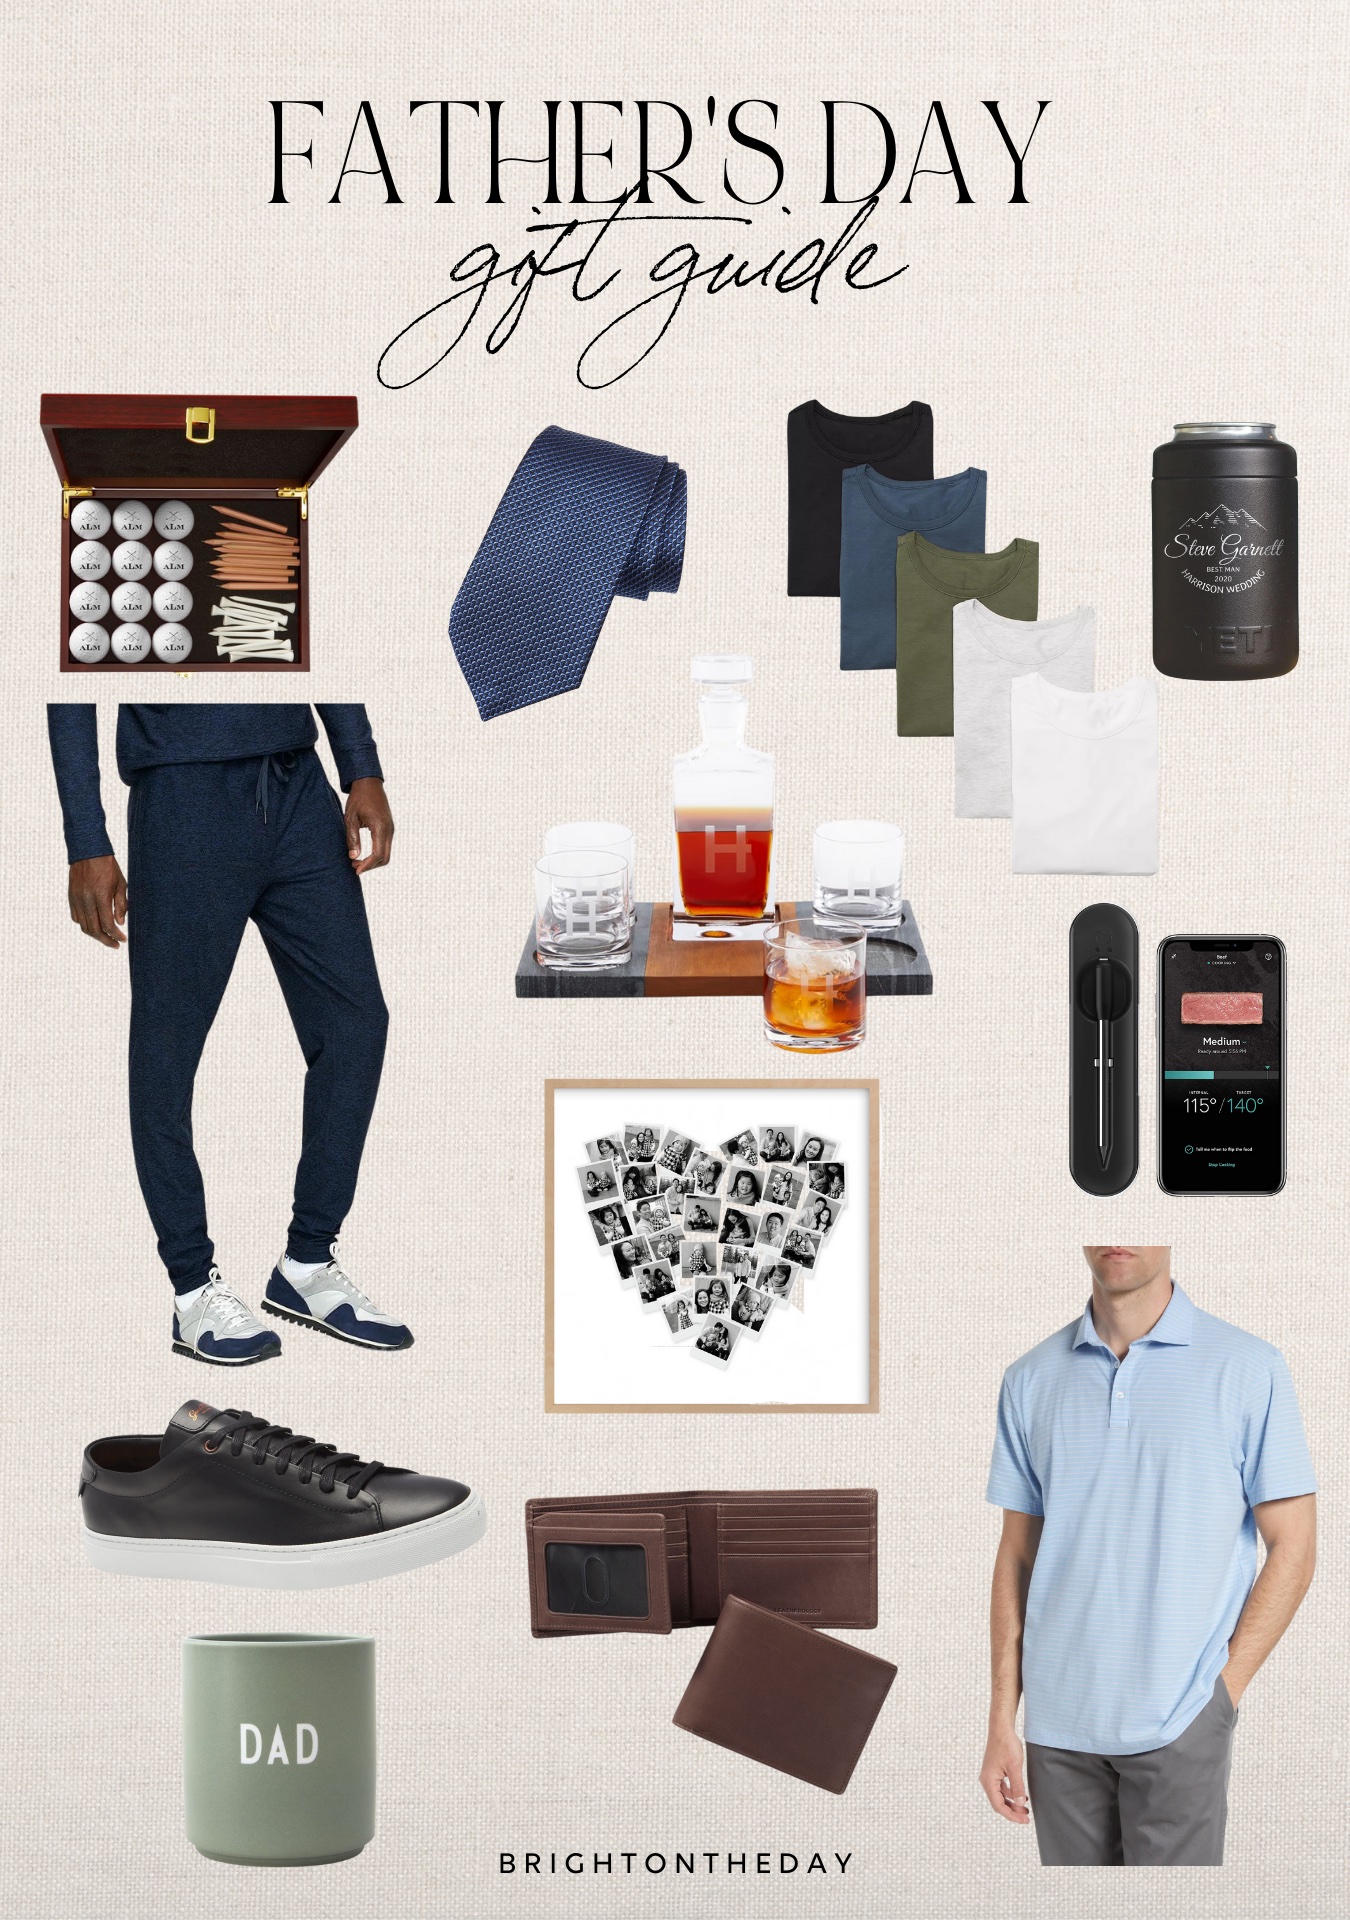 Father's Day gift ideas from designer brands - Tampa Bay Business & Wealth